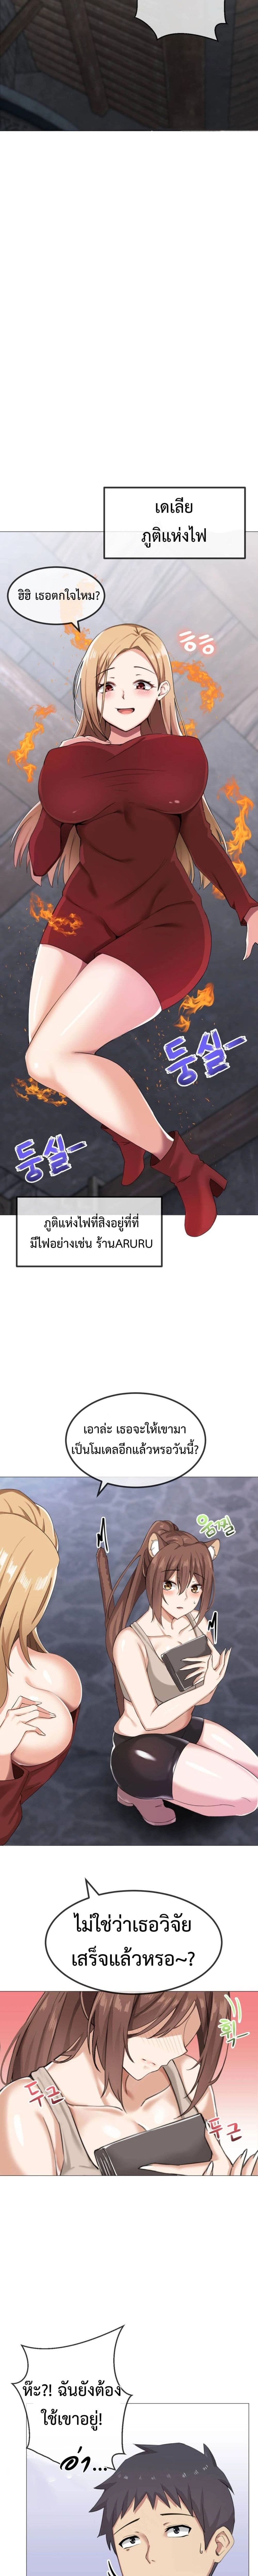 Meat Doll Workshop in Another World ตอนที่ 1 ภาพ 11